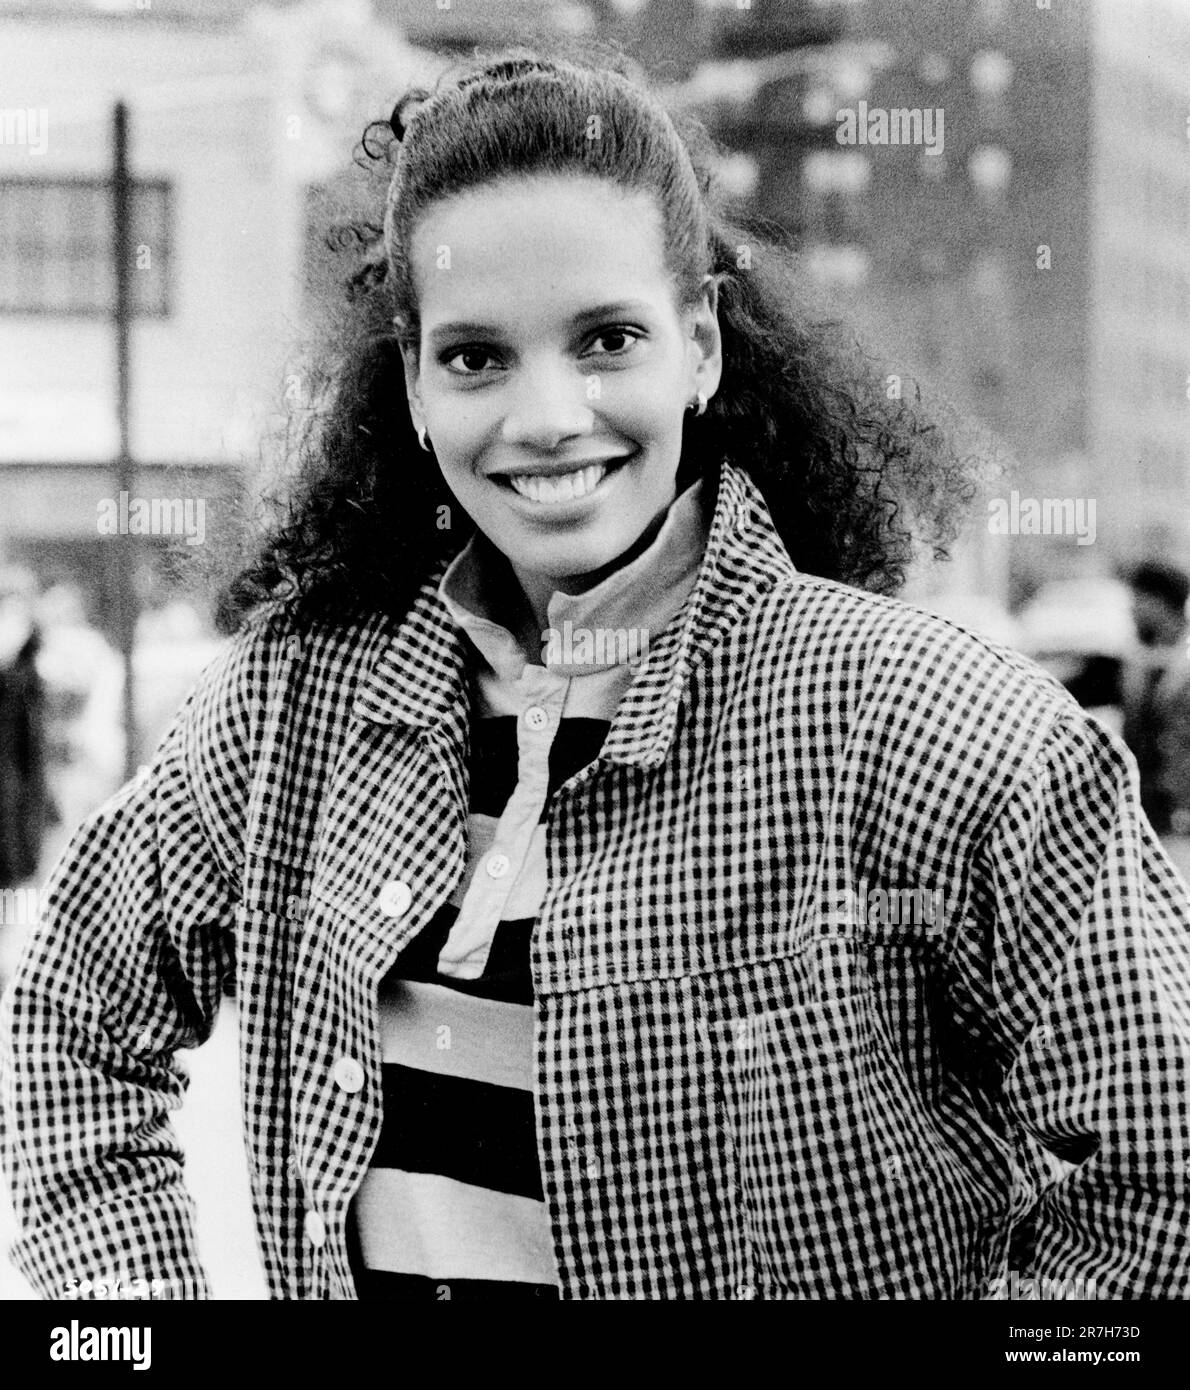 Shari Headley, on-set of the Film, 'Coming to America', Paramount Pictures, 1988 Foto Stock